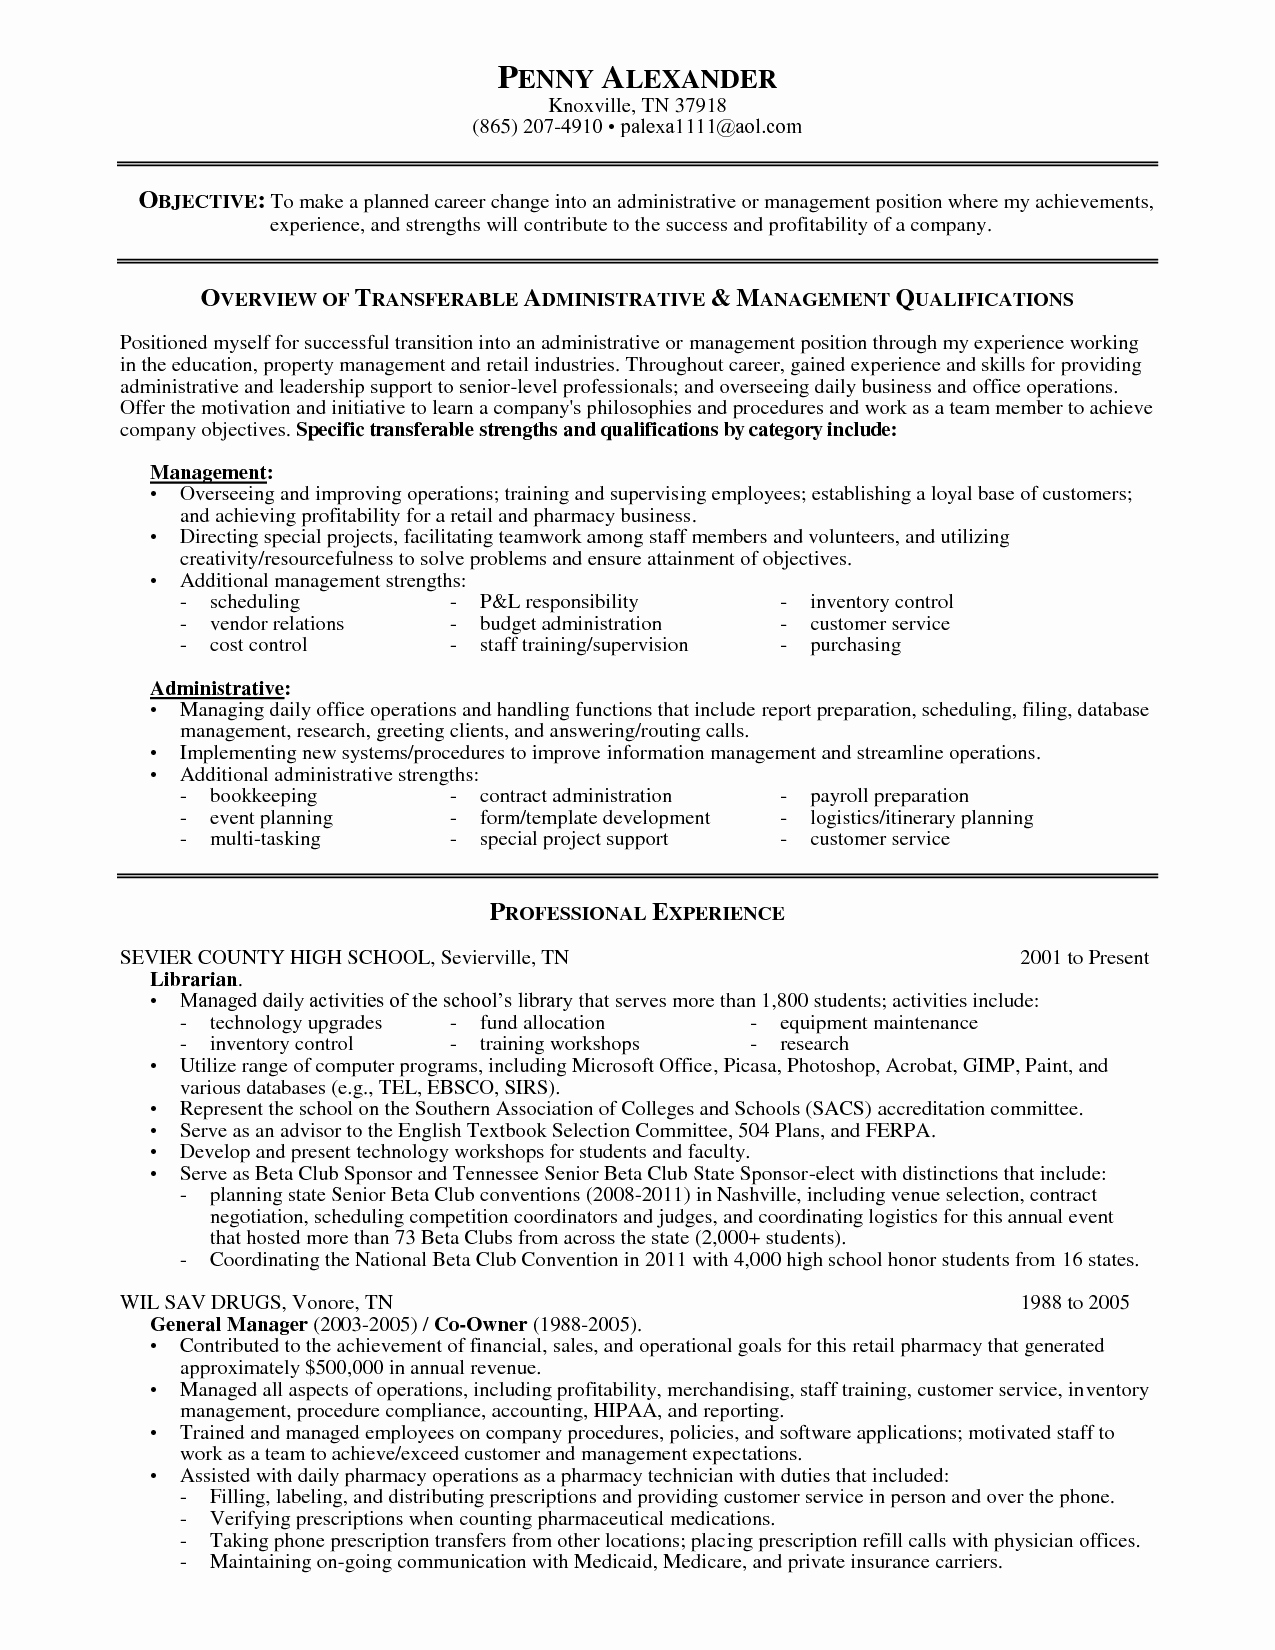 Executive Sales Administrative assistant Resume Fice